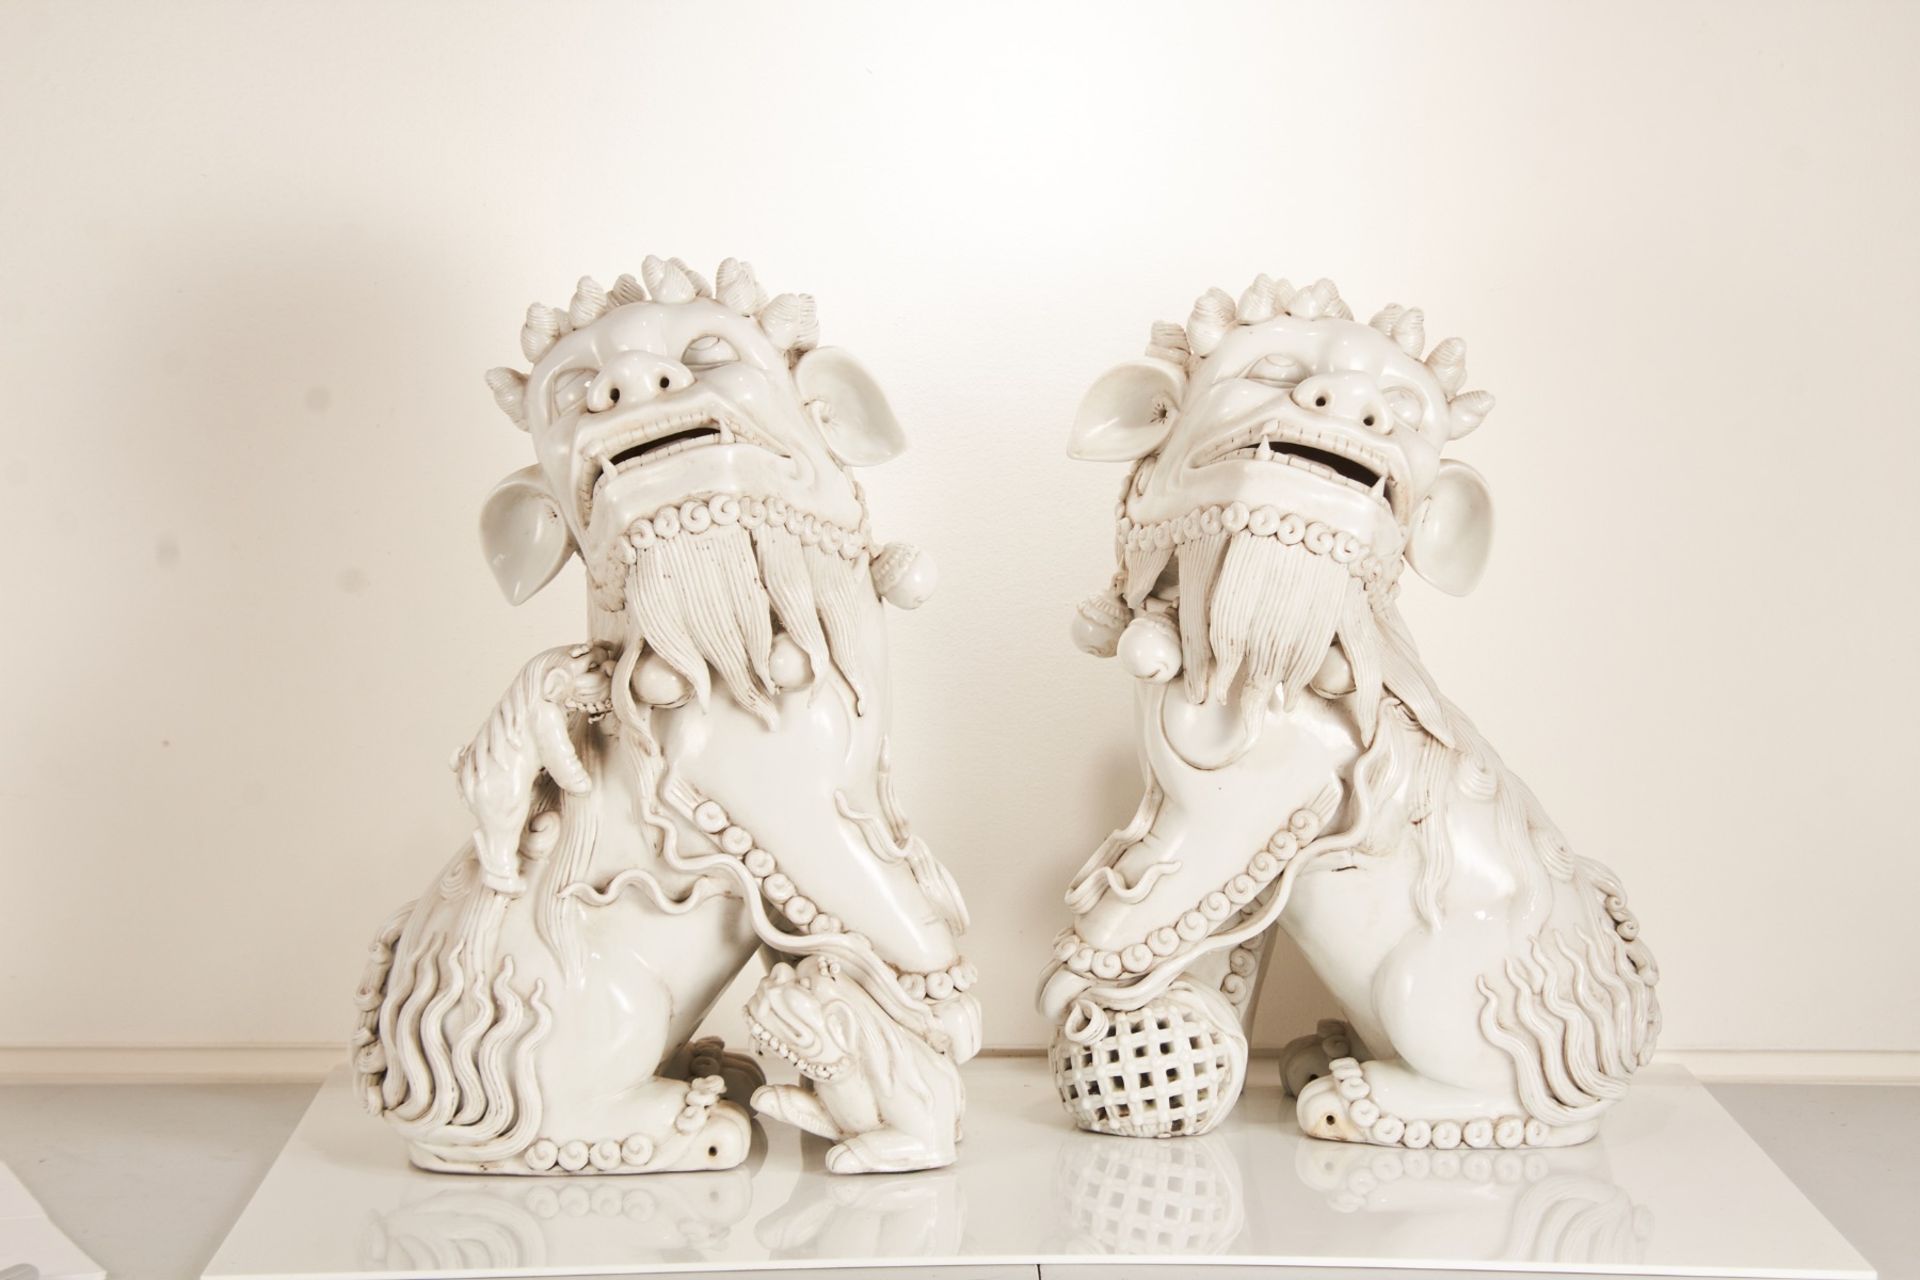 A pair of late-20th century Chinese porcelain blanc-de-chine Foo dogs or lion dog